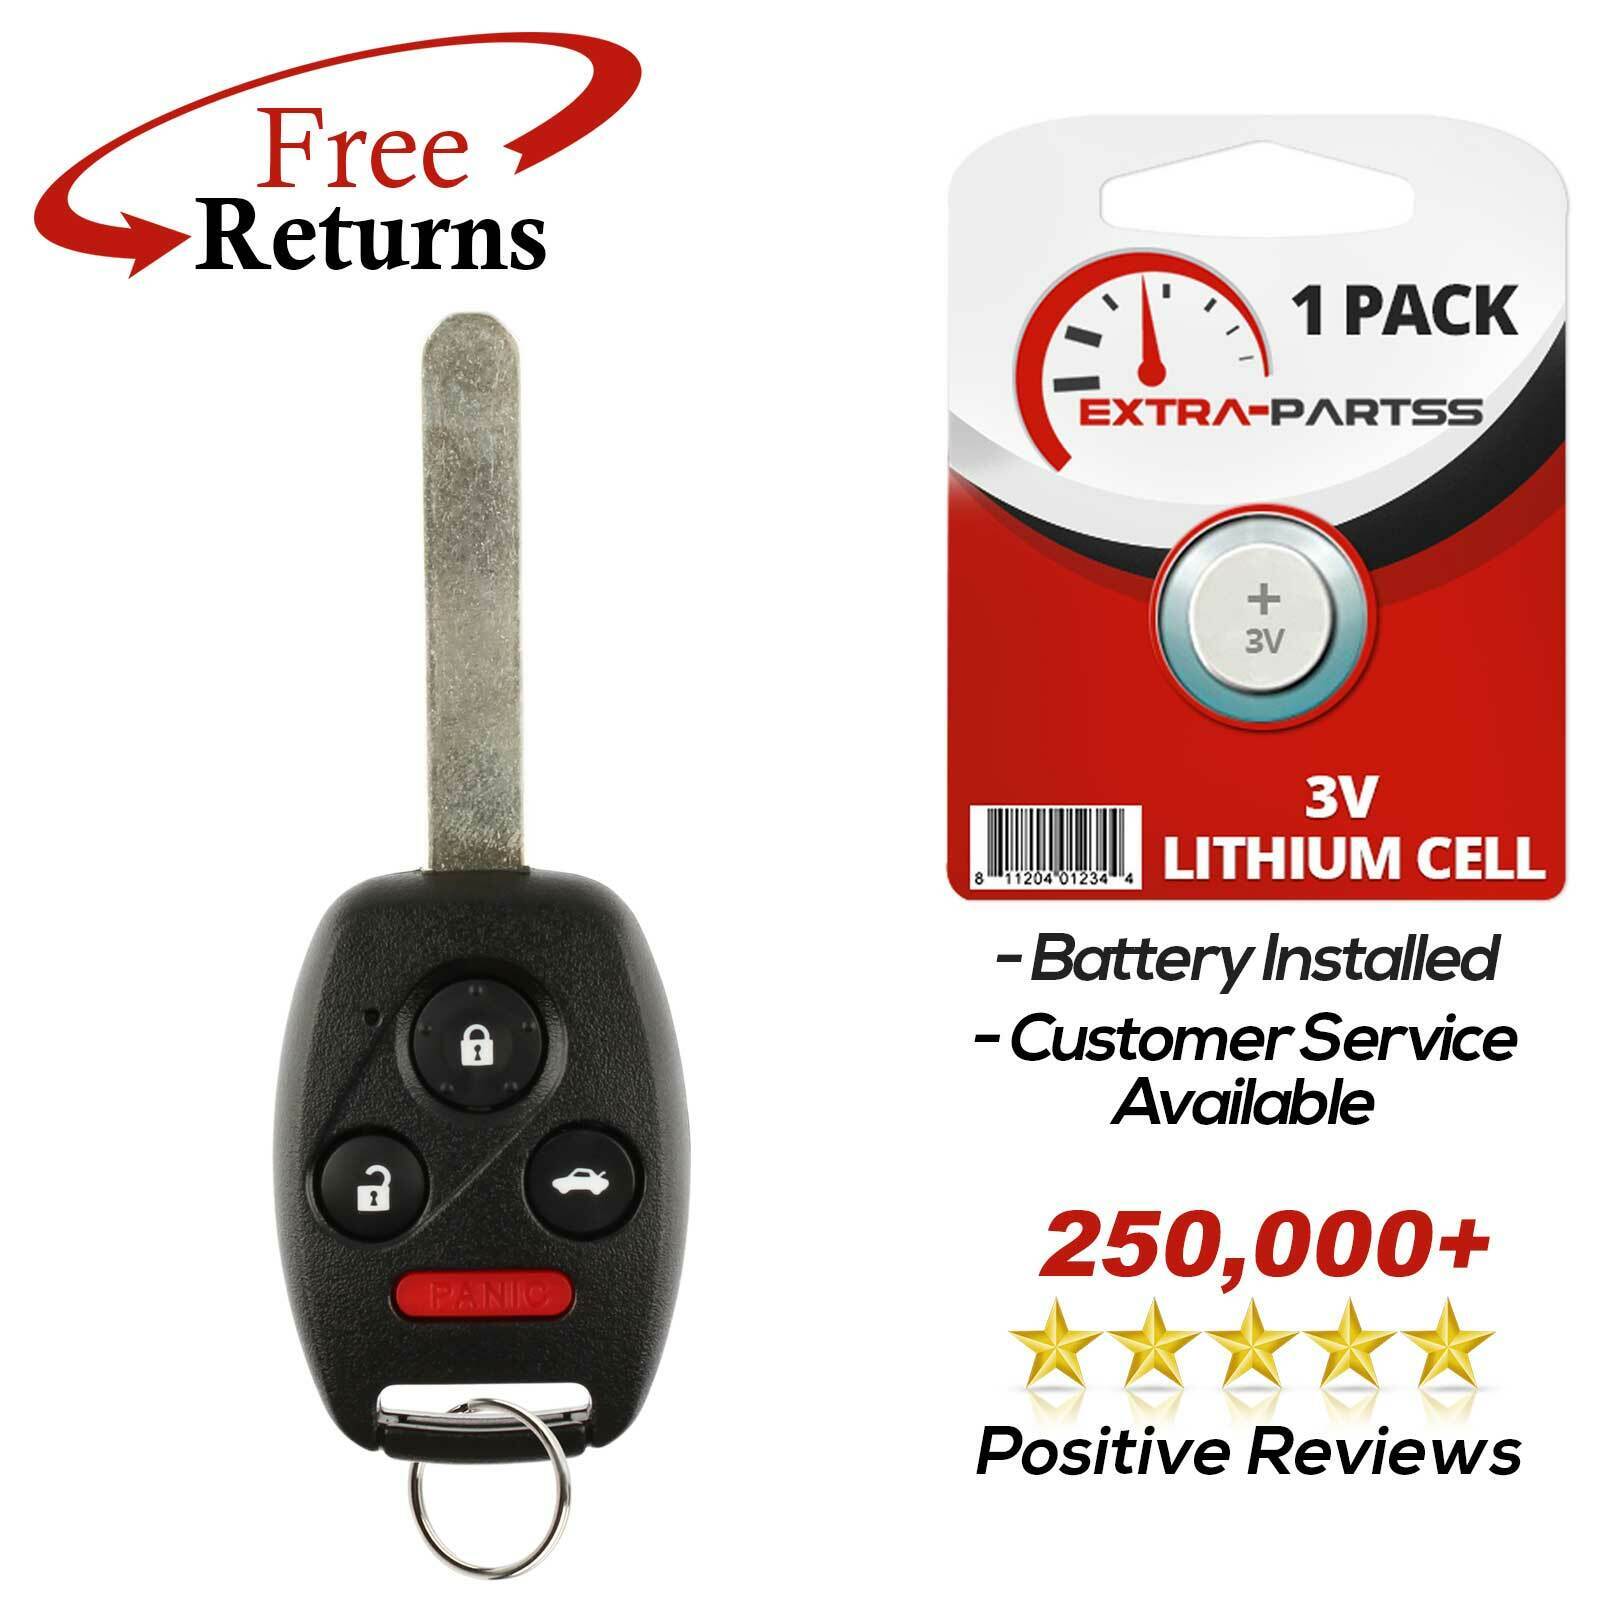 New Replacement Uncut Key Keyless Entry Remote Fob For Honda OUCG8D-380H-A